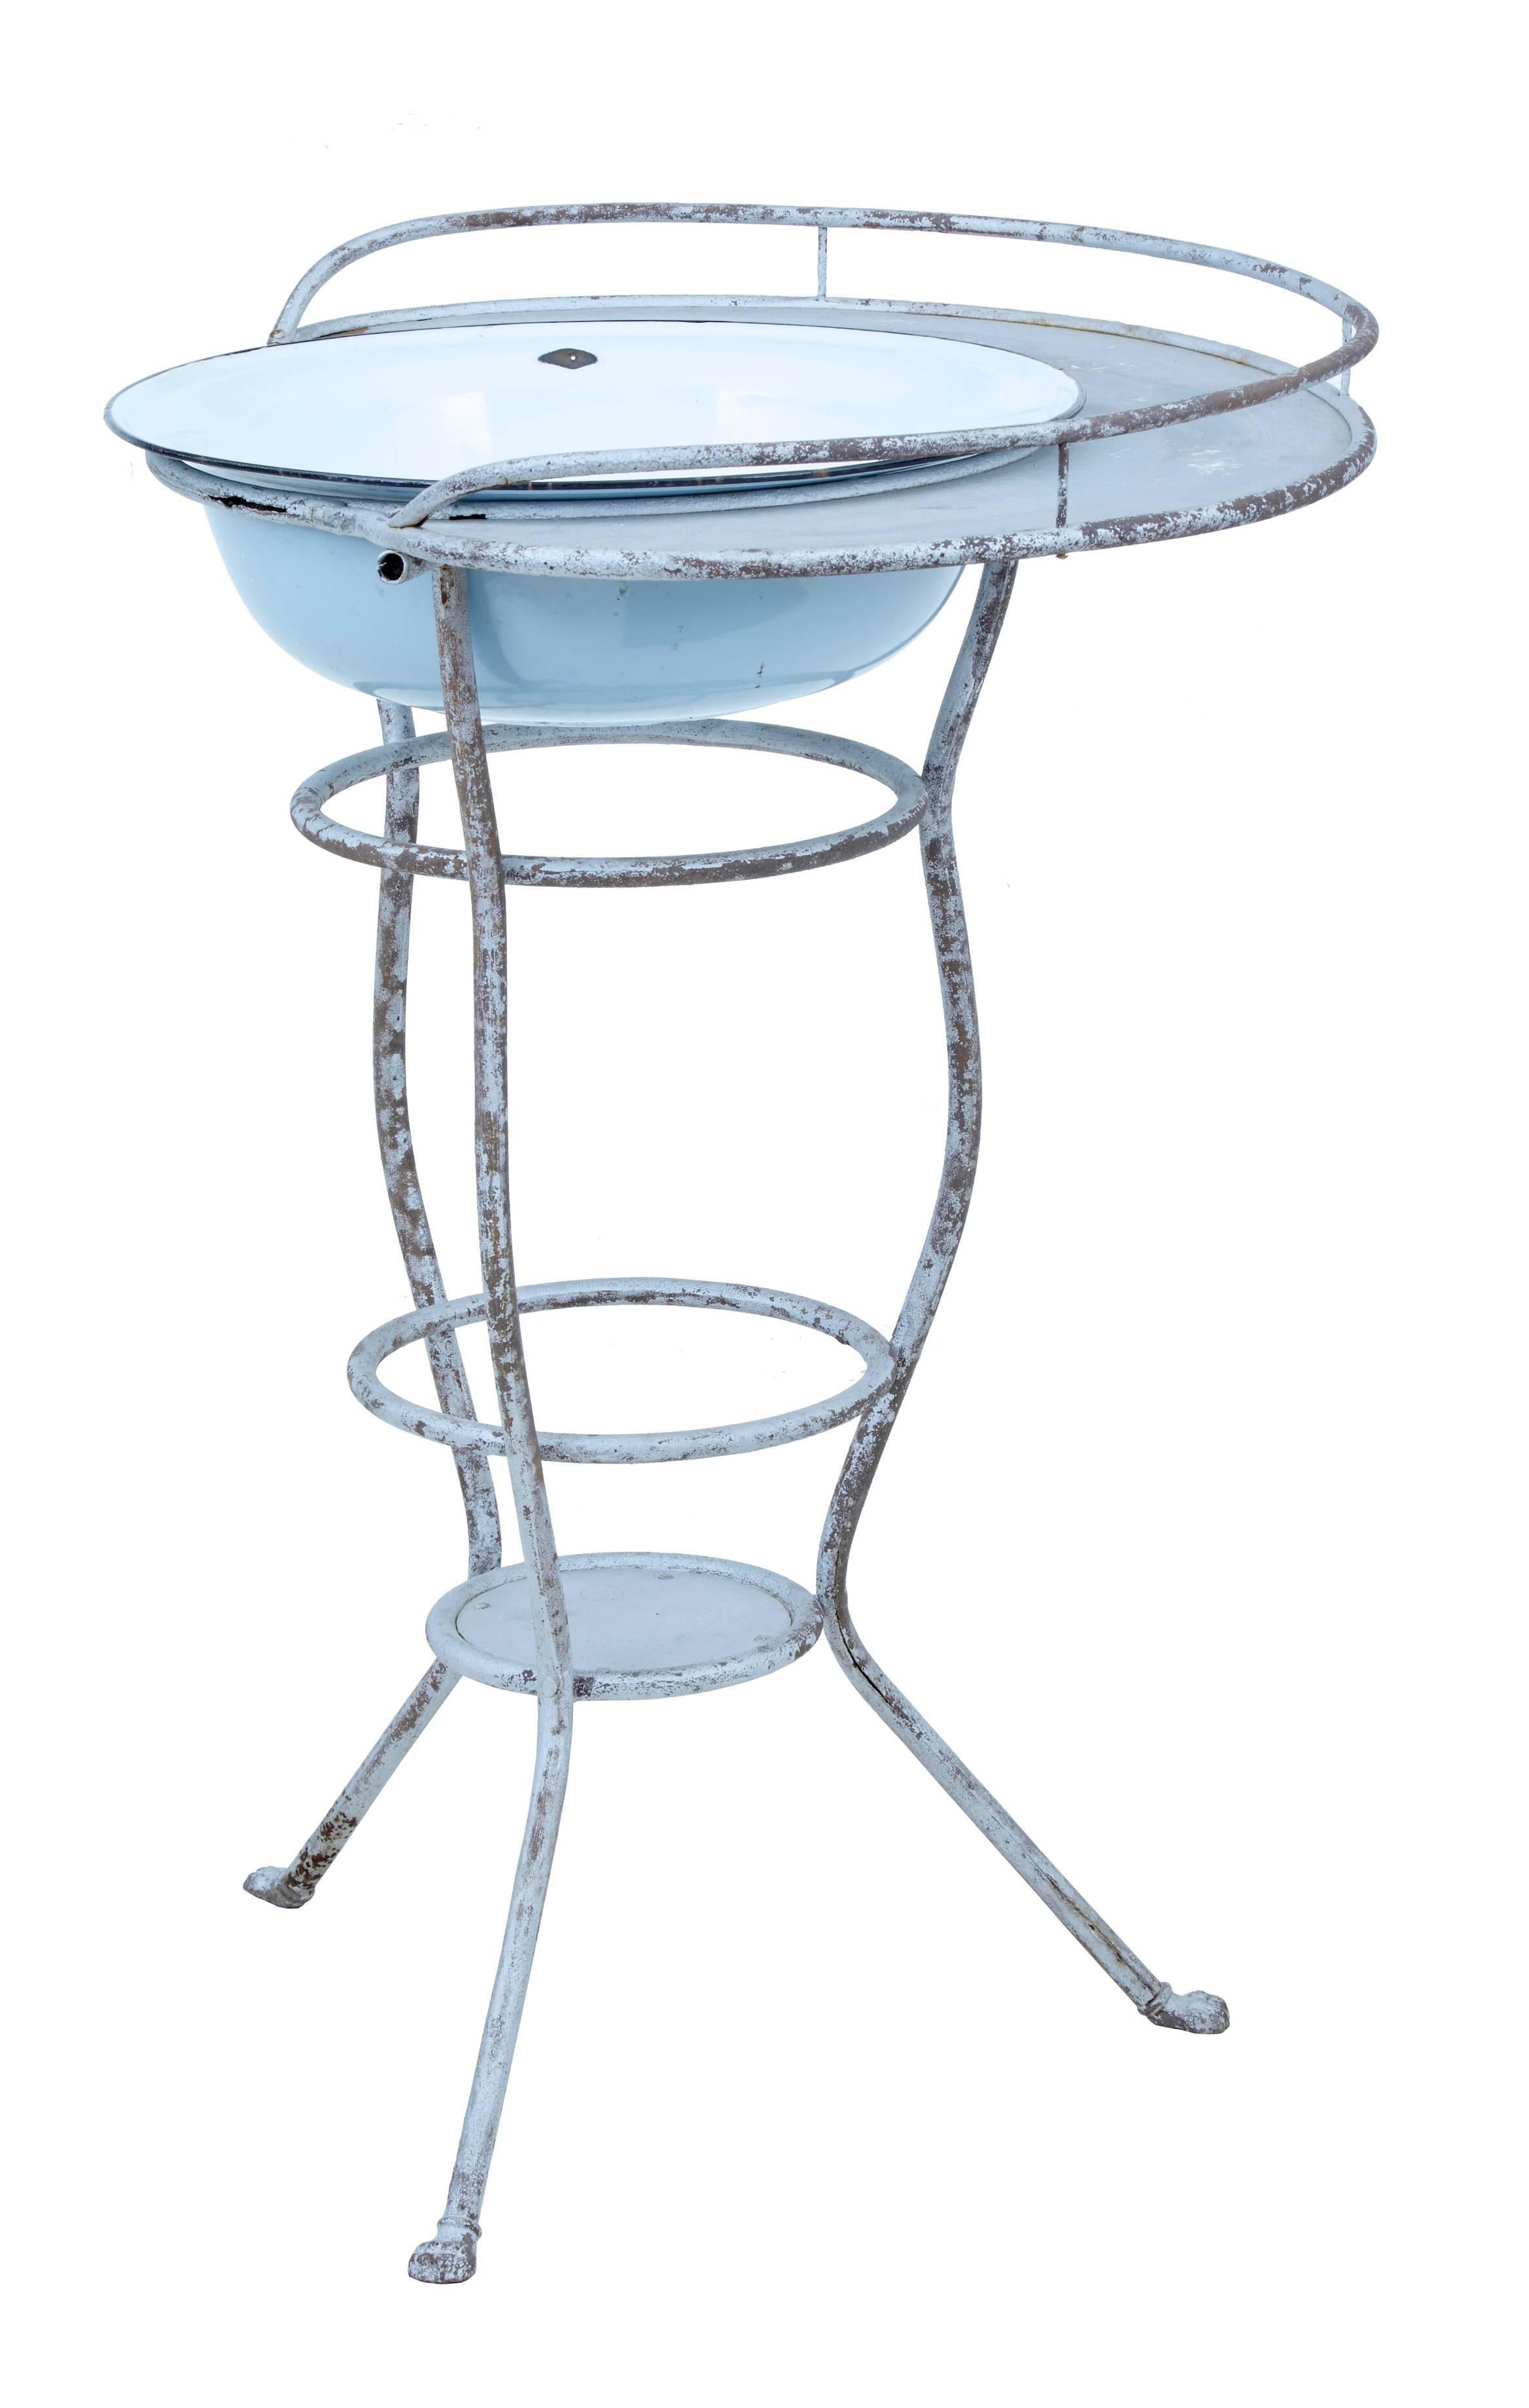 Industrial or quite possibly military metal wash Stand.
With drop in enamel bowl.
Later painted silver with losses.

Measures: Height: 30 3/4